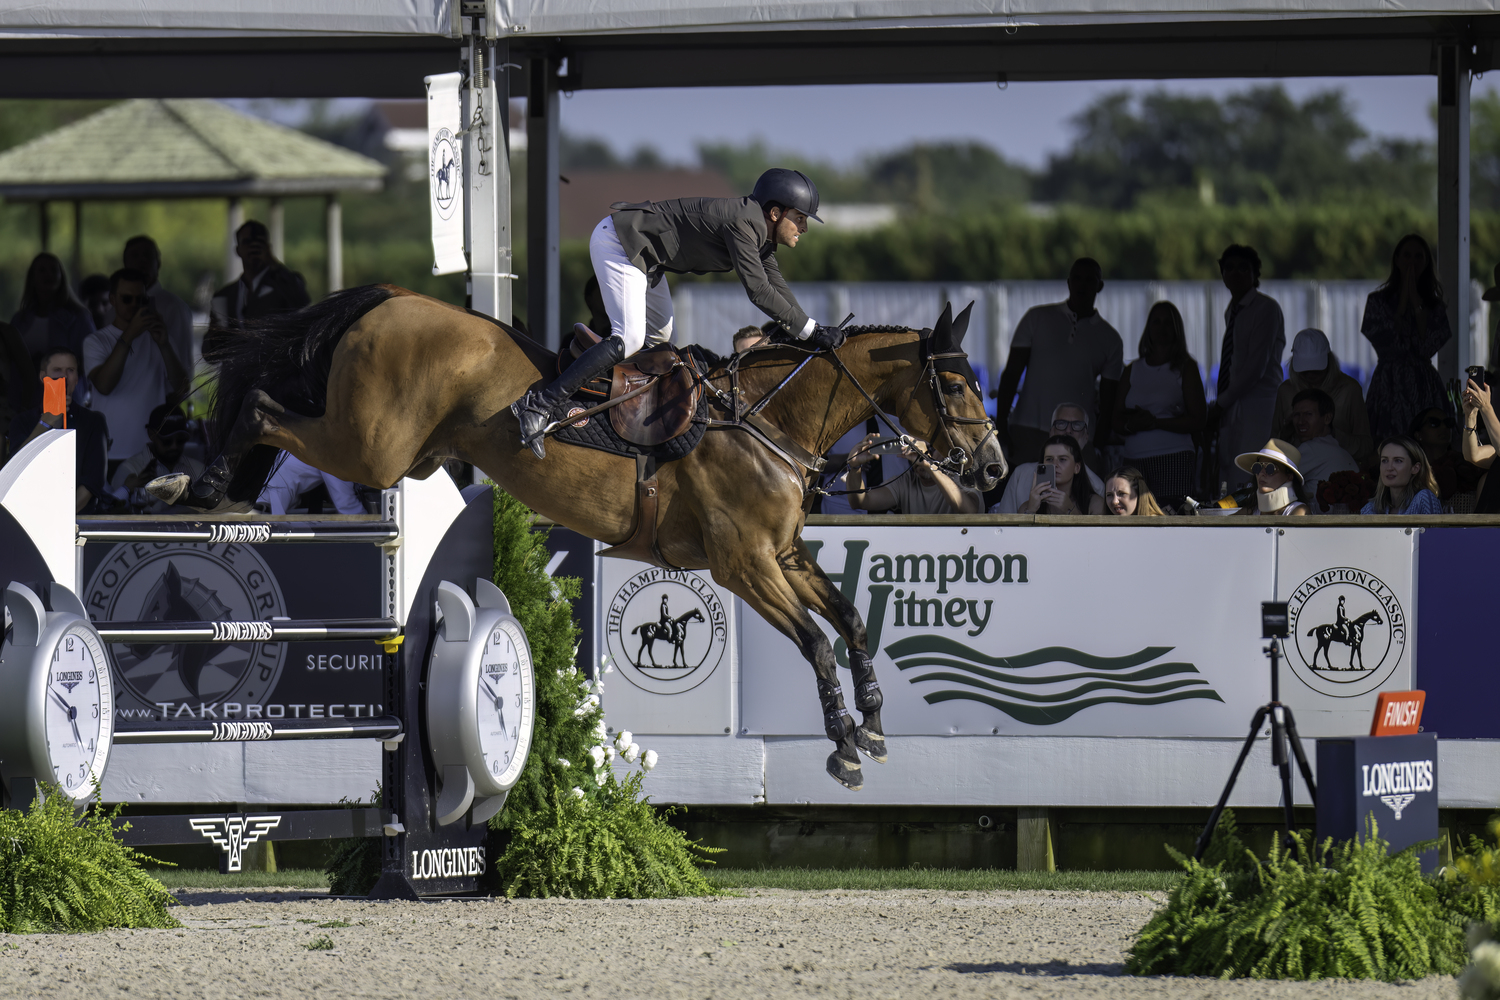 Daniel Bluman and his horse, Ladriano Z, prevailed in a two-rider jump-off to win the $425,000 Longines Hampton Classic Grand Prix on Sunday. MARIANNE BARNETT